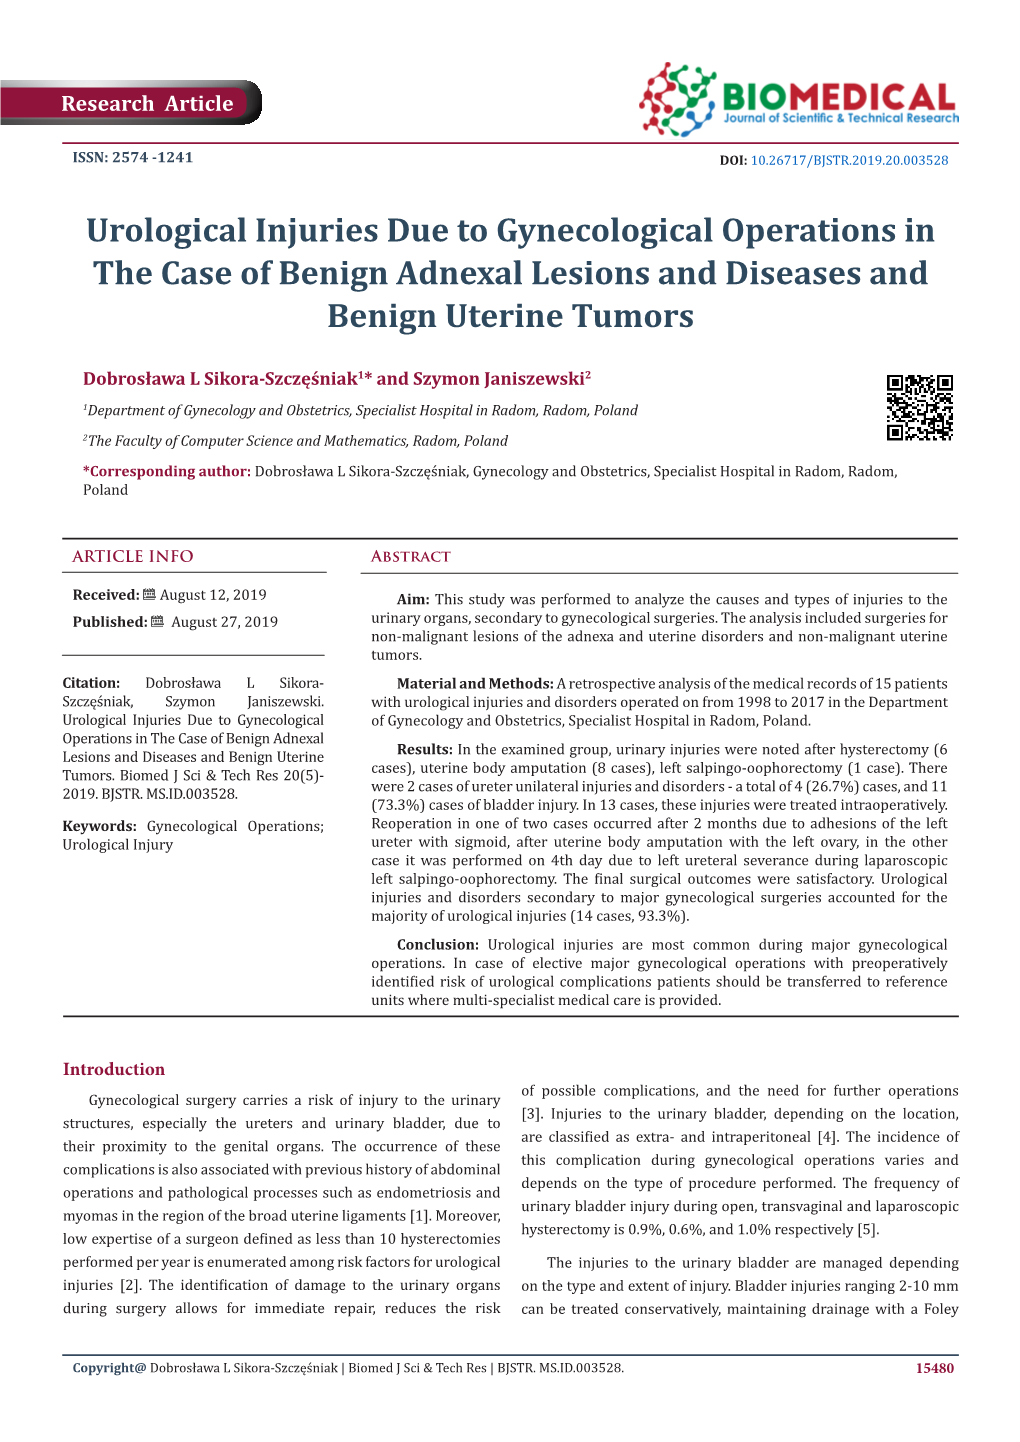 Urological Injuries Due to Gynecological Operations in the Case of Benign Adnexal Lesions and Diseases and Benign Uterine Tumors